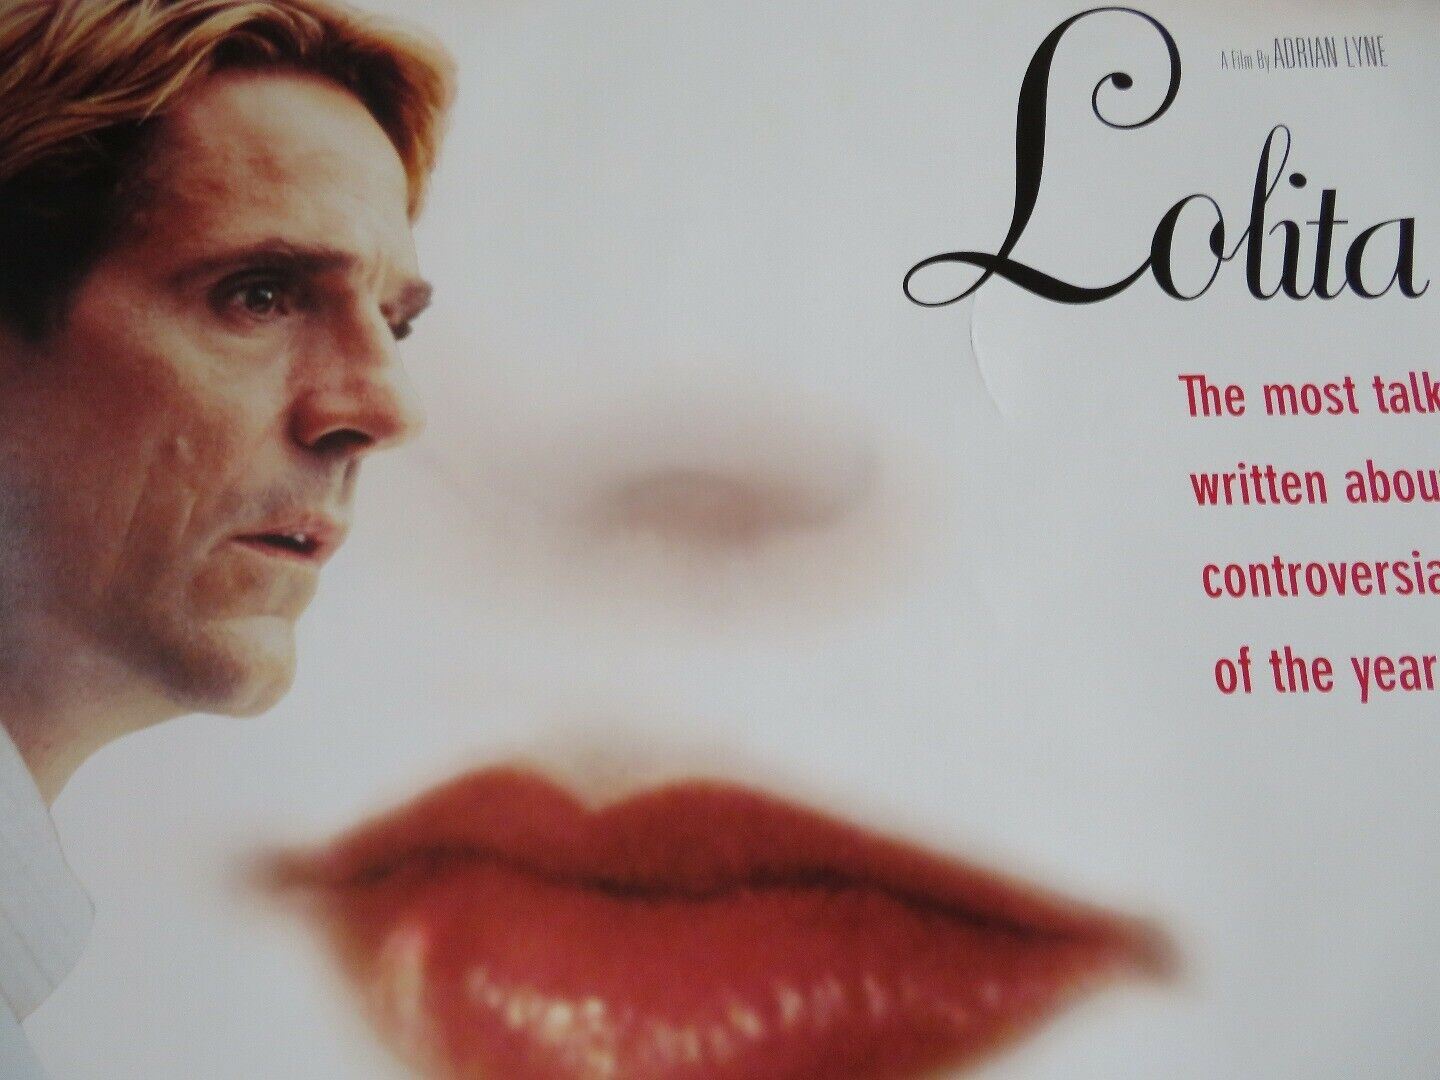 LOLITA  US ONE SHEET ROLLED POSTER JEREMY IRONS MELANIE GRIFFITH 1997